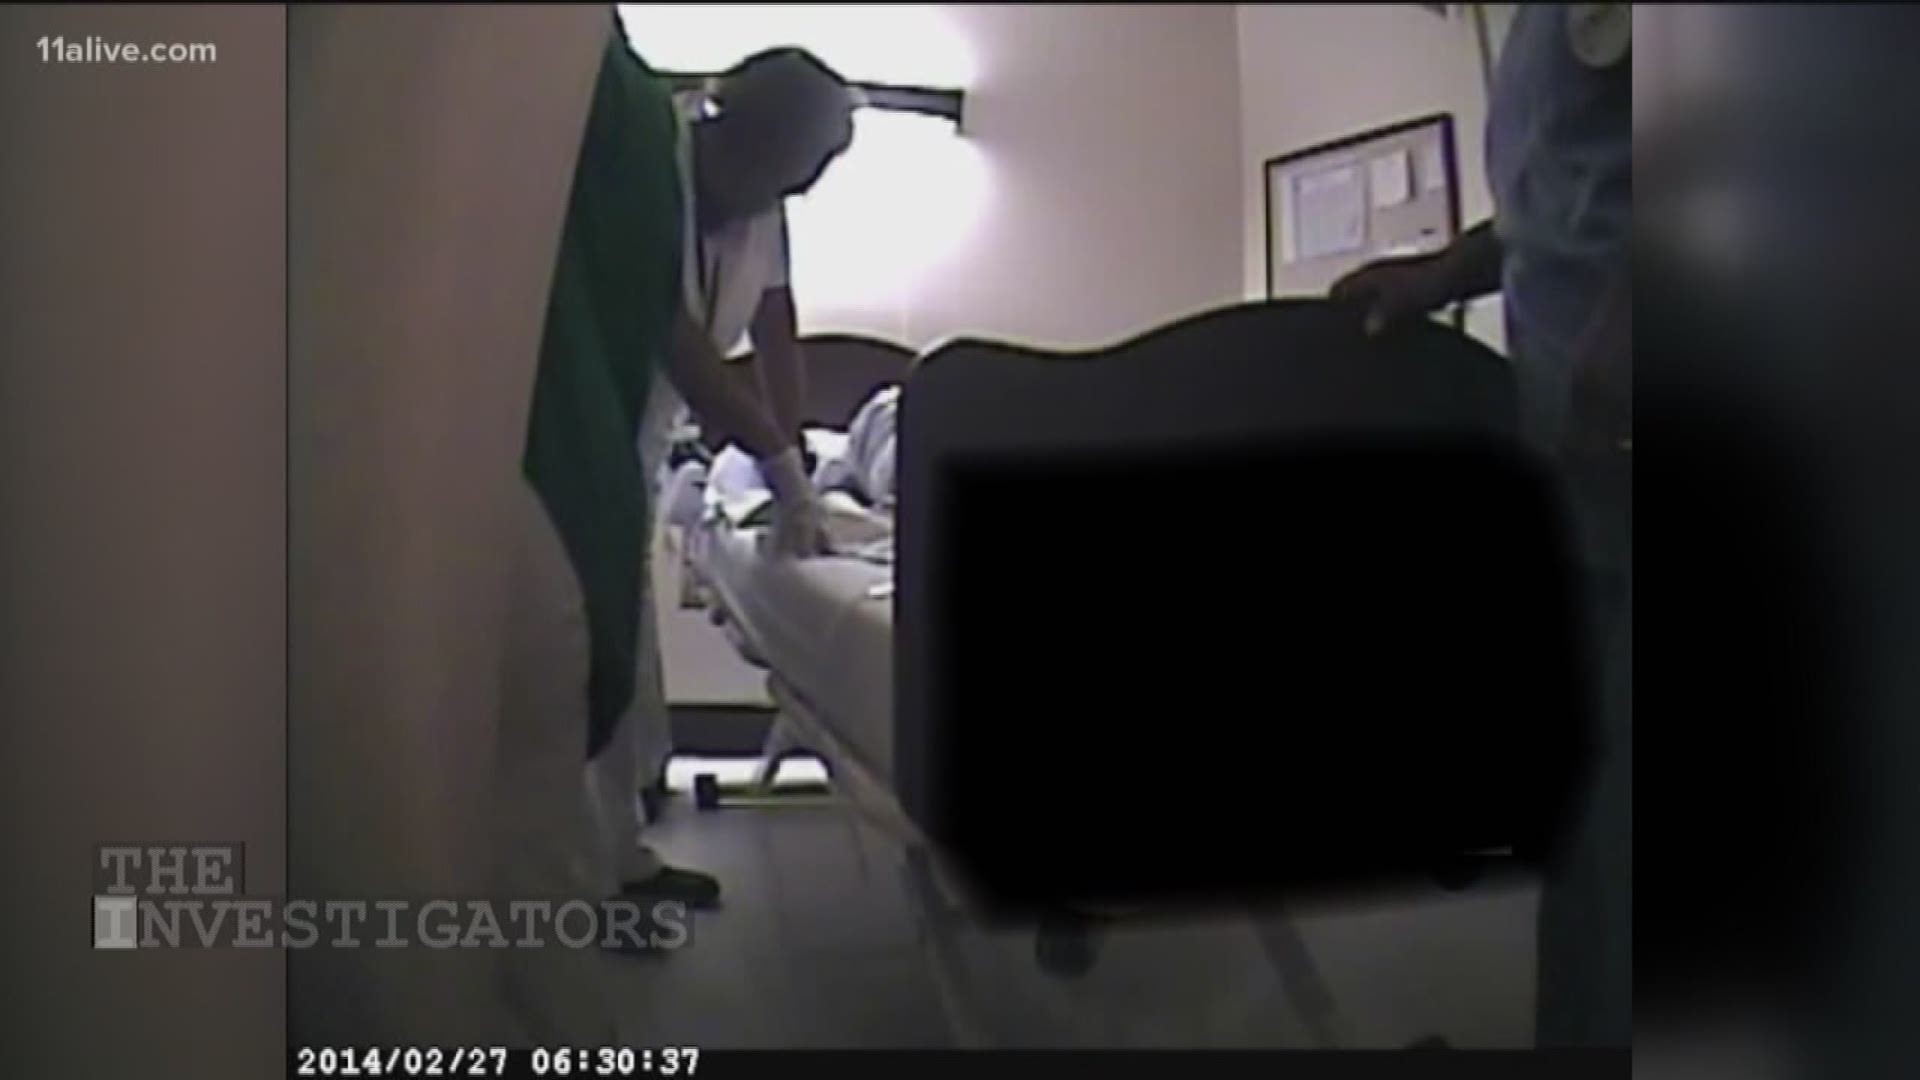 Charges came after an 11Alive investigation revealed a hidden camera that captured the moments leading to his death.